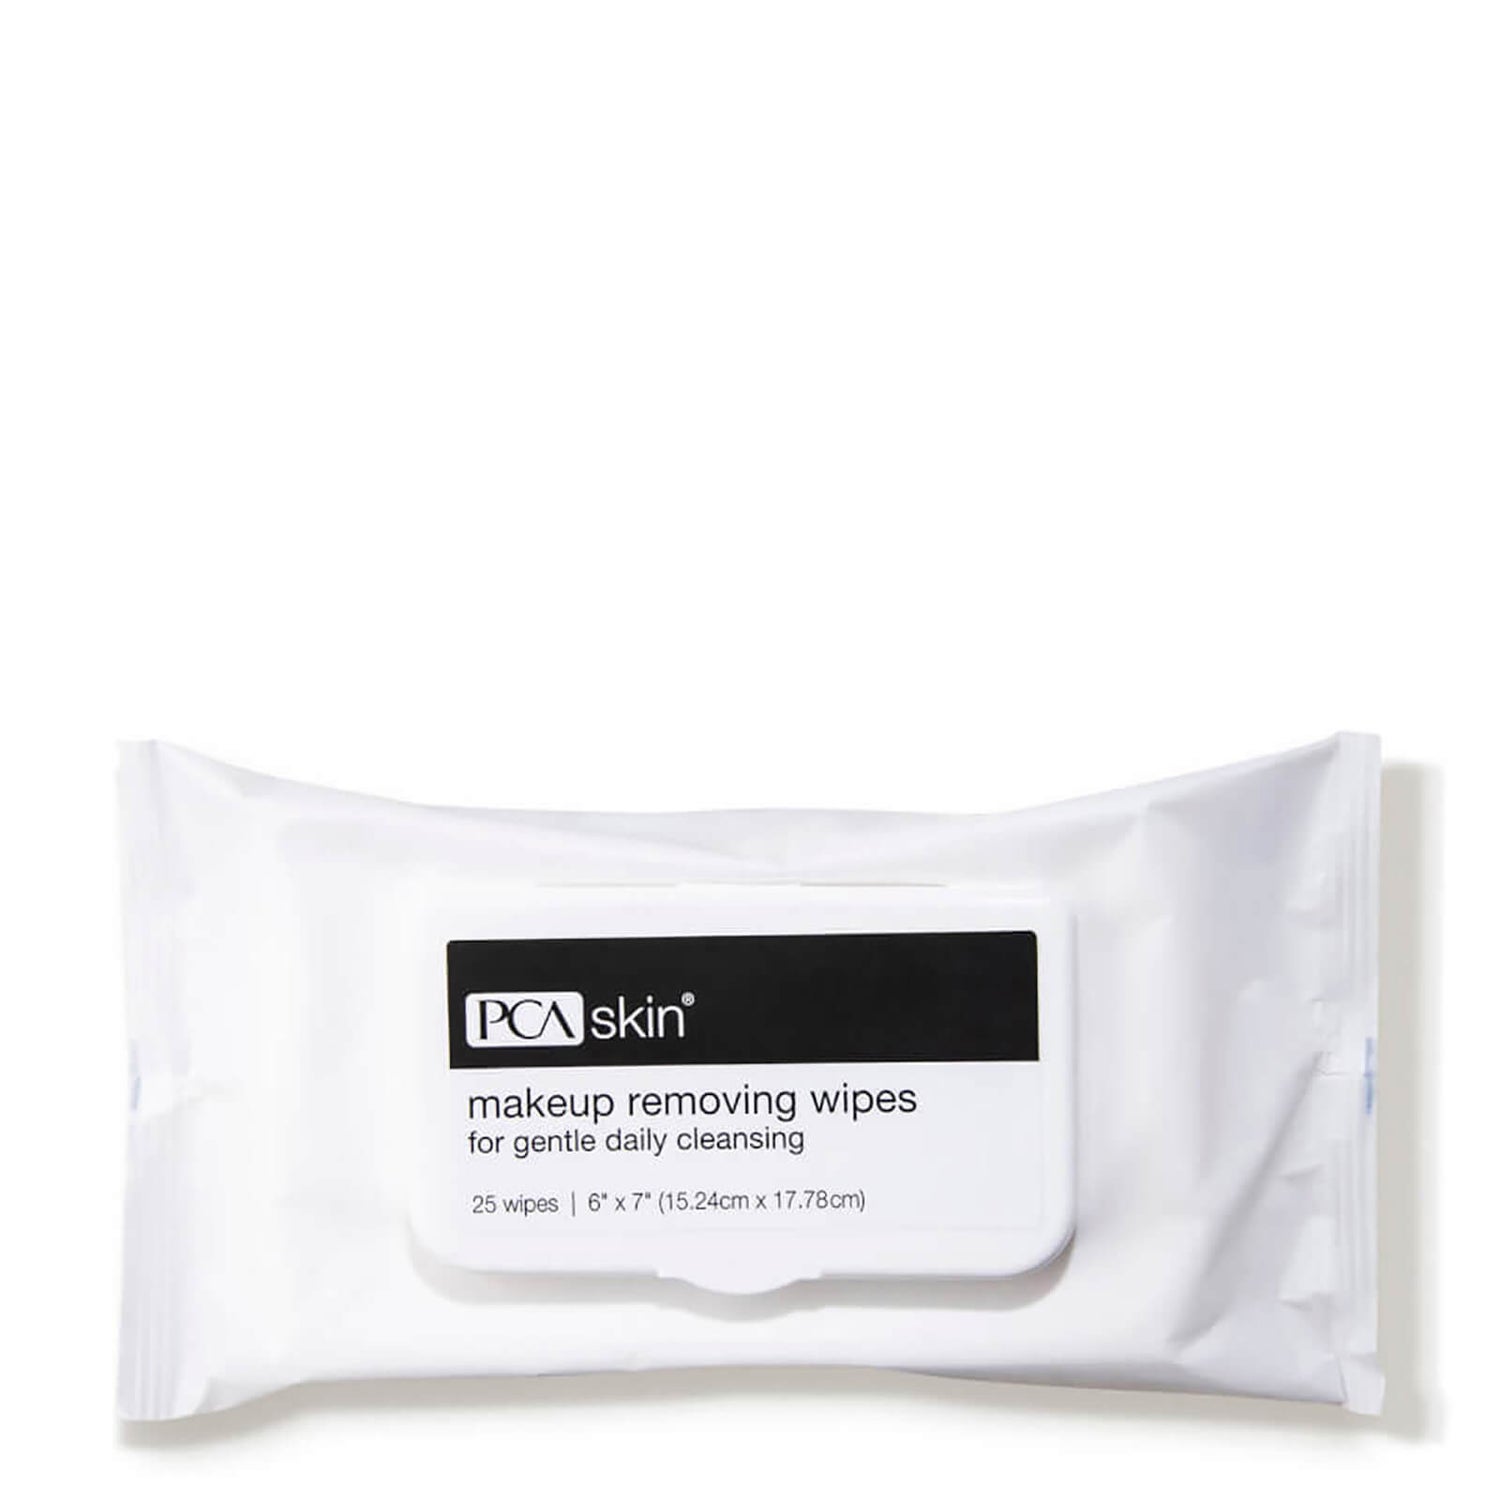 PCA SKIN Makeup Removing Wipes (Pack of 25)